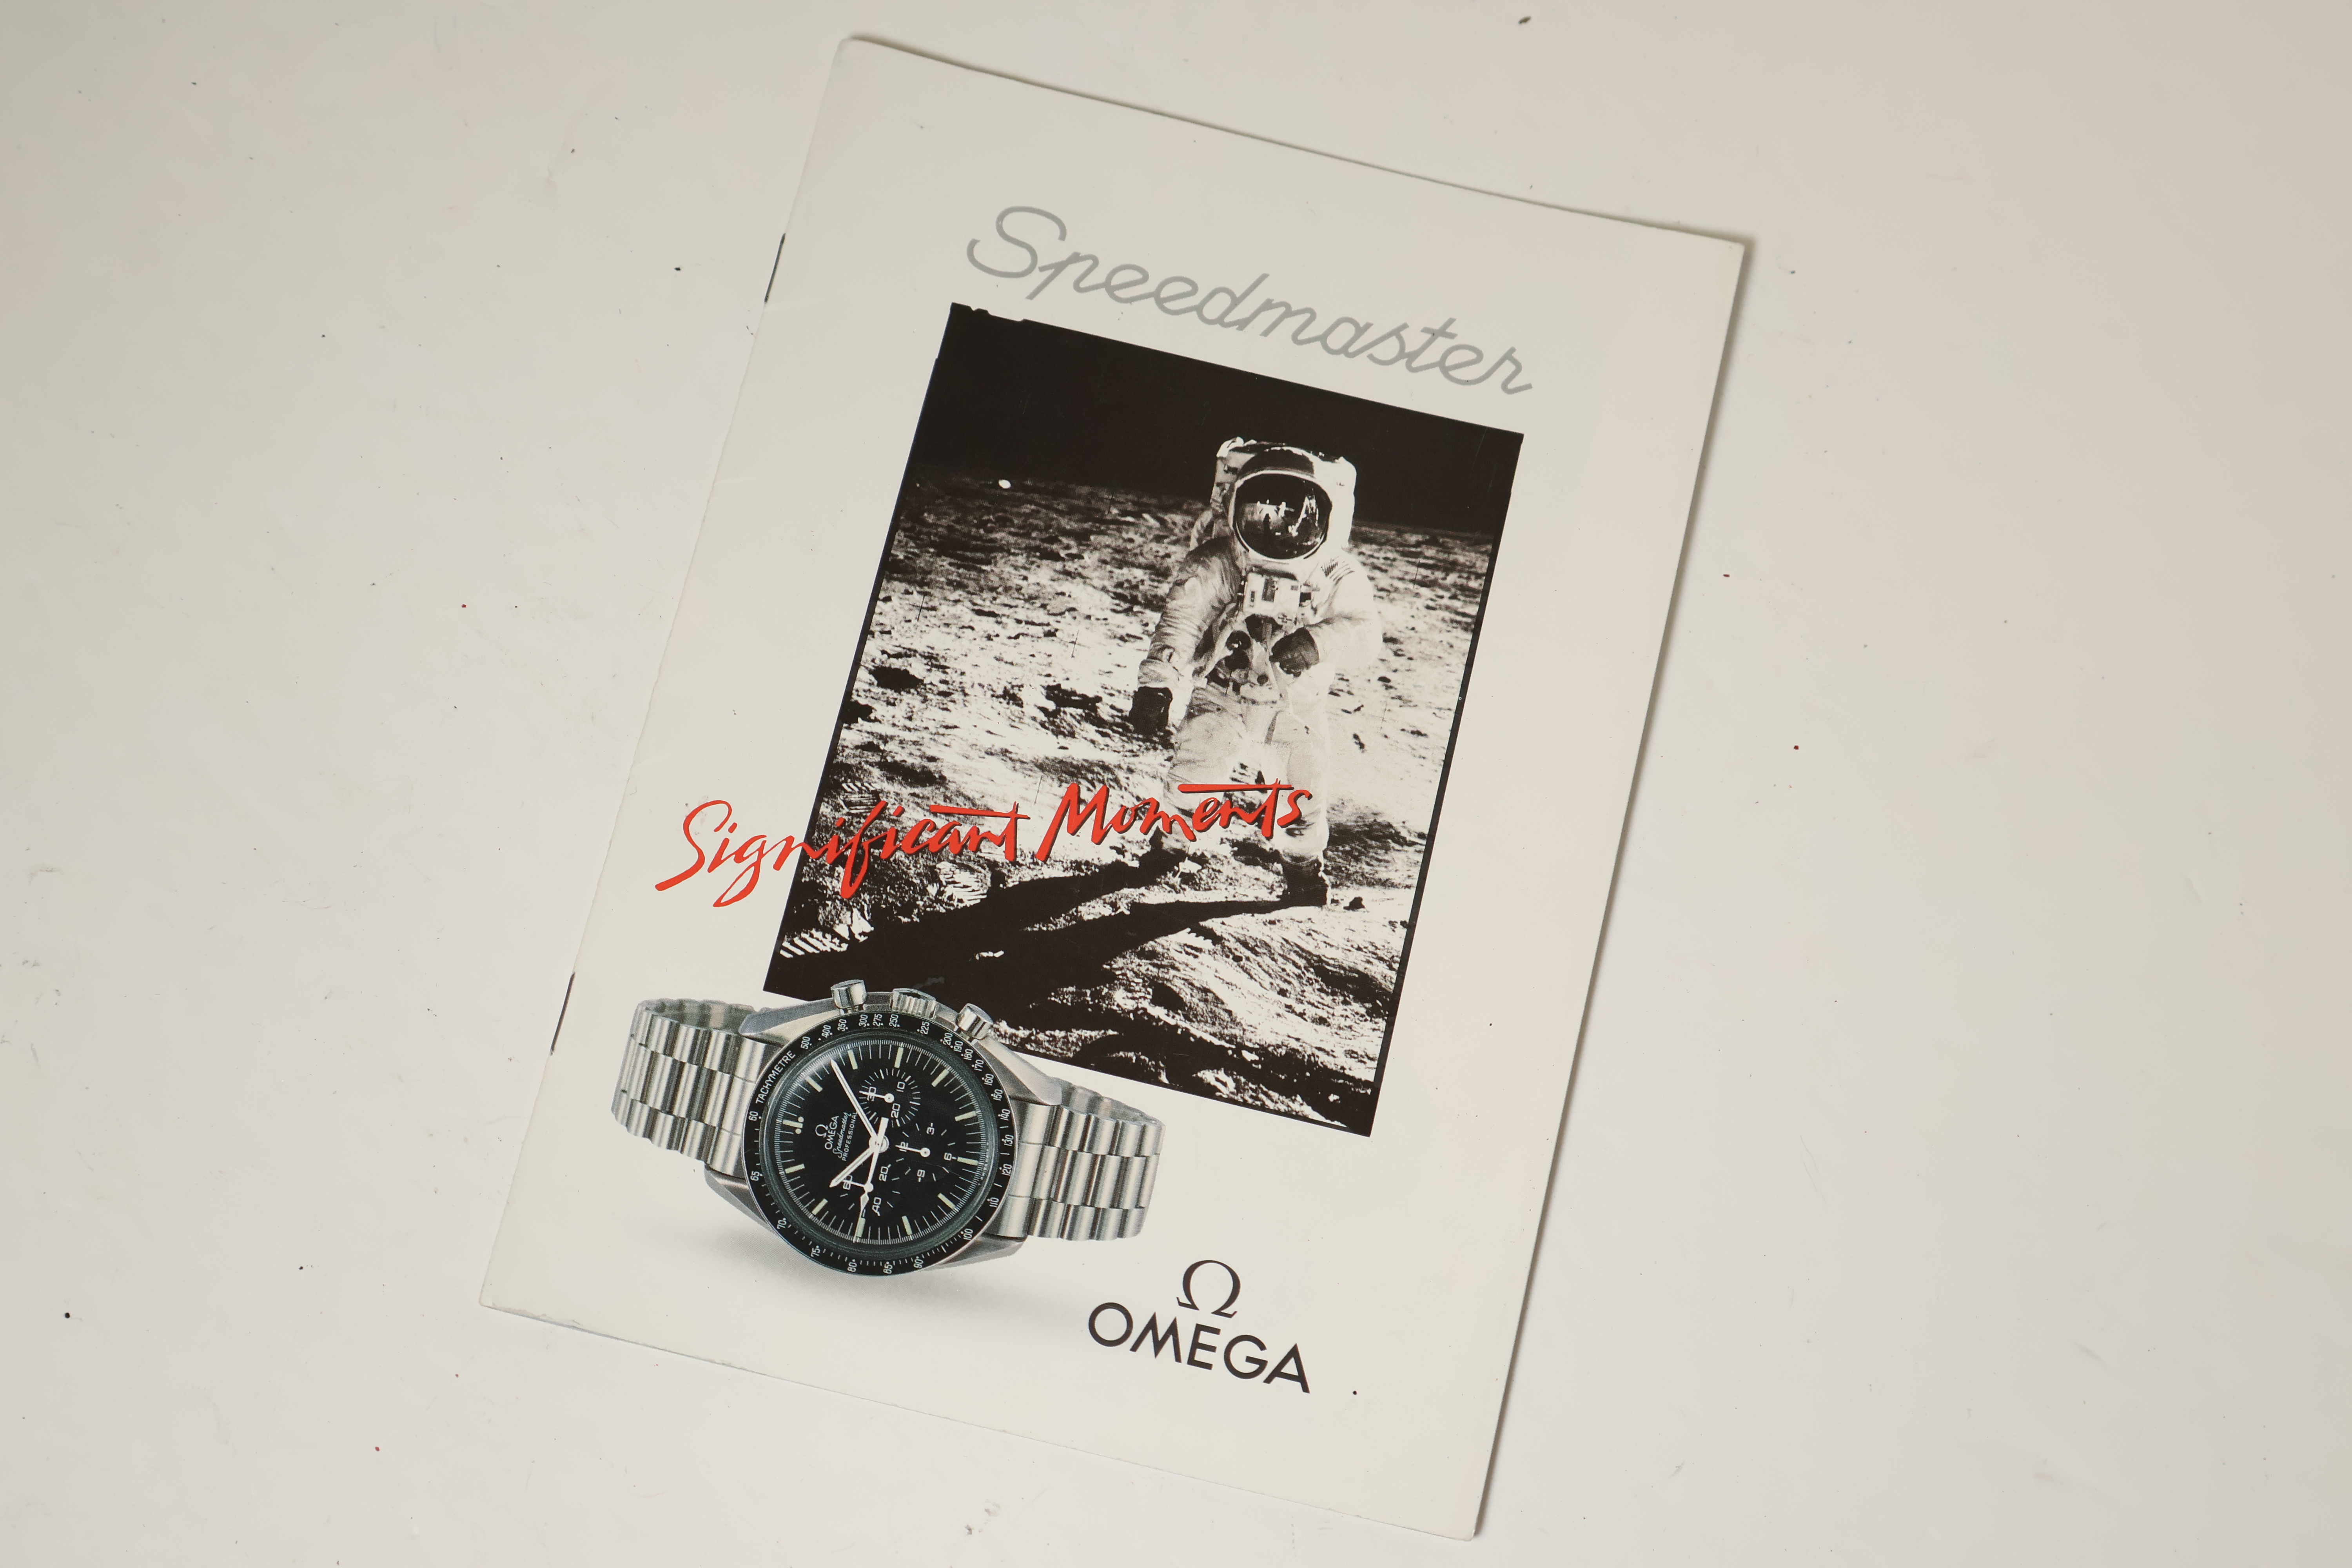 *To Be Sold Without Reserve* Omega Speedmaster 'Significant moments' booklet